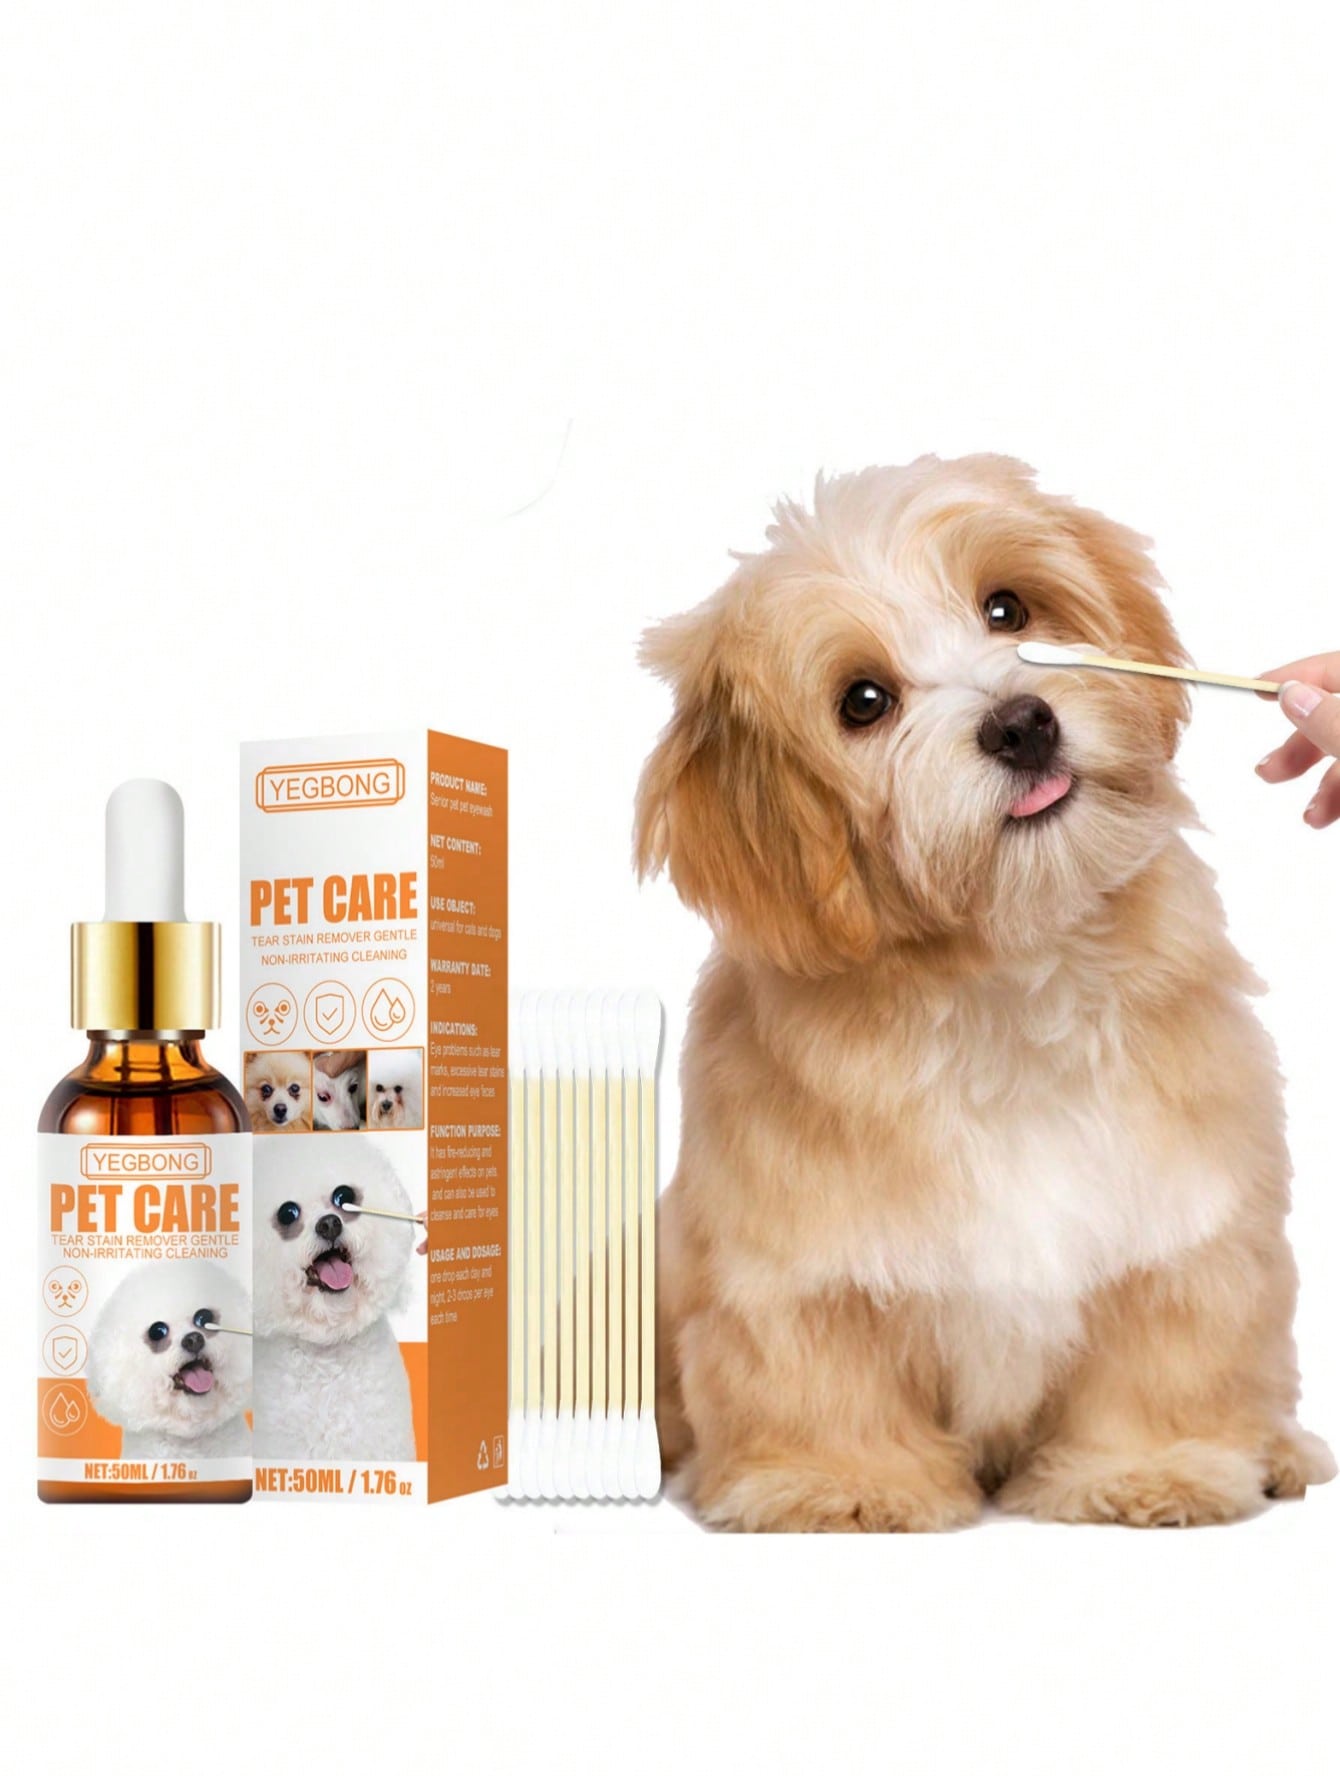 1pc Pet Eye Drops For Tear Stain Removal And Cleaning Suitable For Both Dogs And Cats